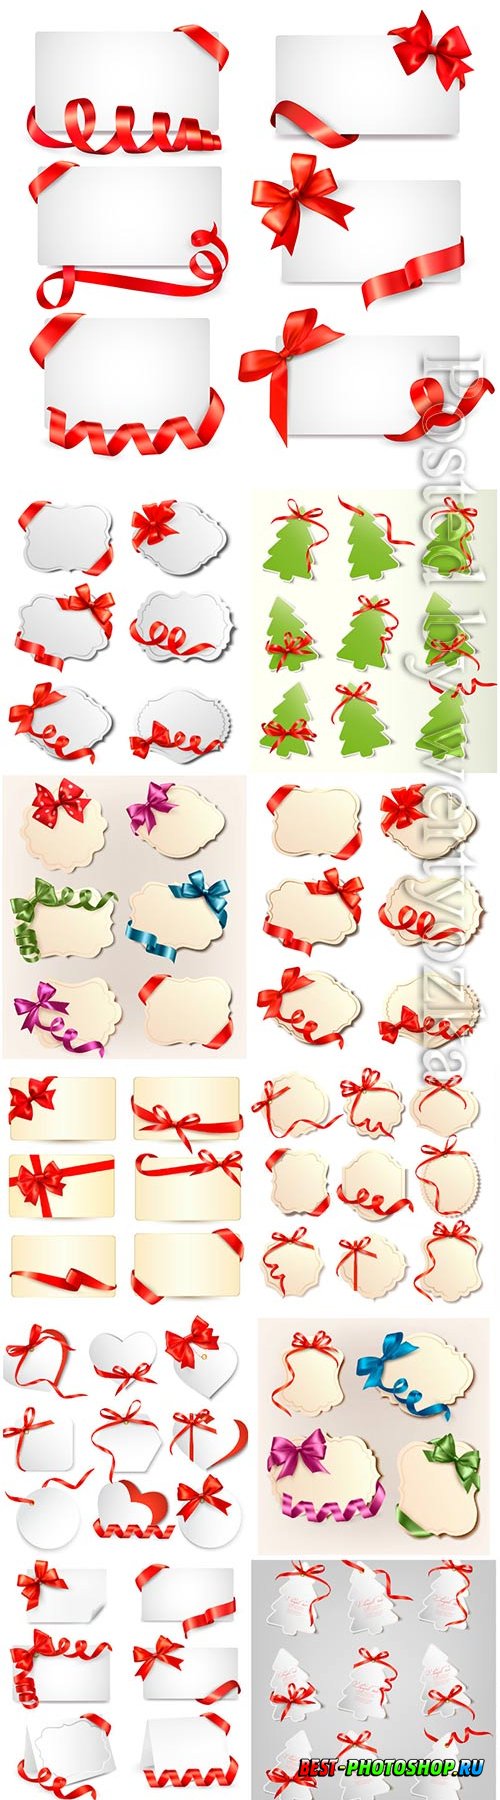 Set of gift vector cards with colorful gift bows with ribbons